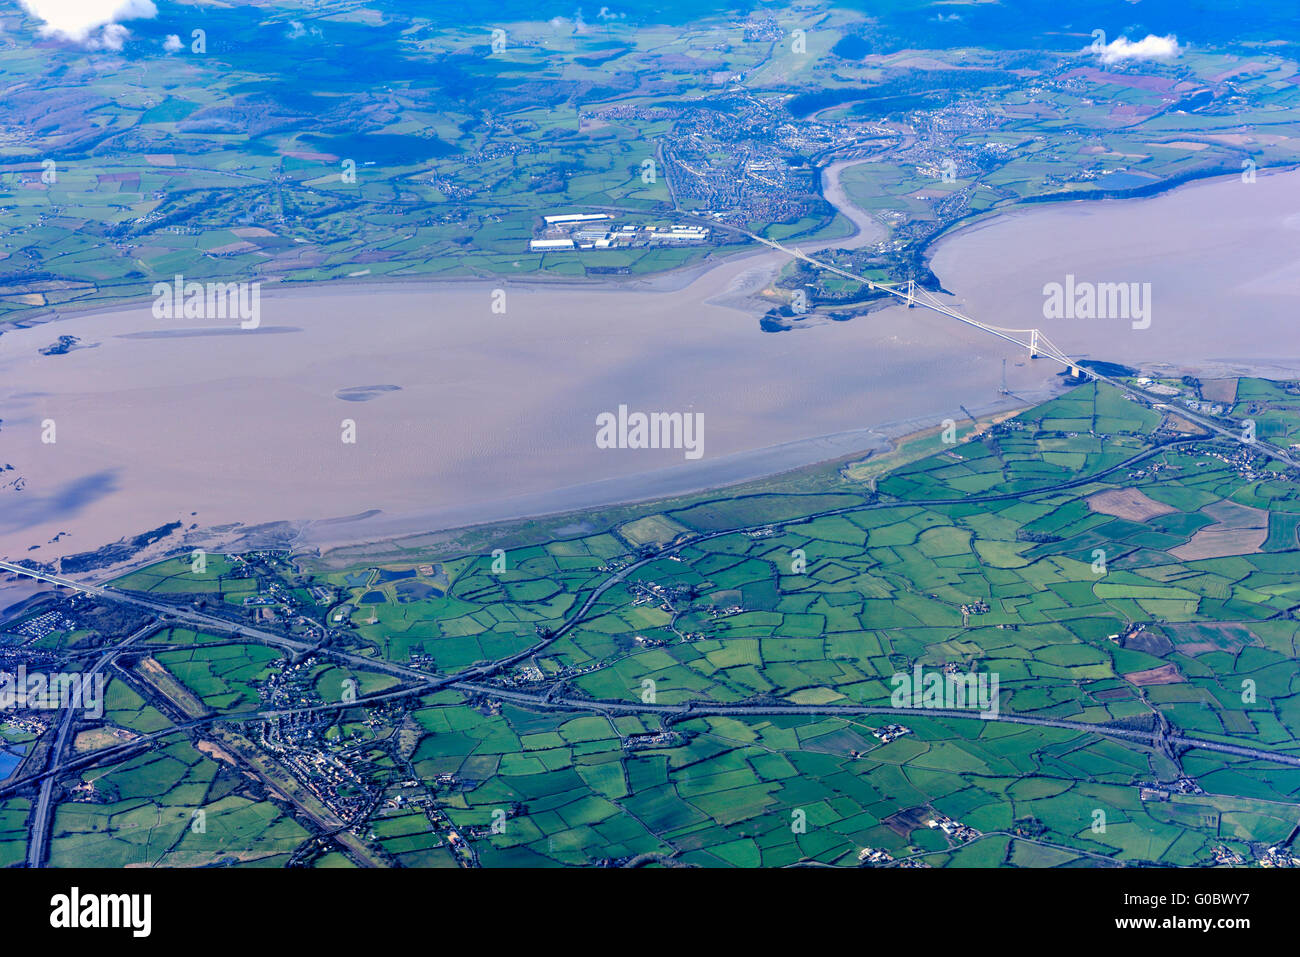 Aerial view River Severn Estuary with old Severn road bridges, between England and Wales and patchwork of agricultural fields Stock Photo